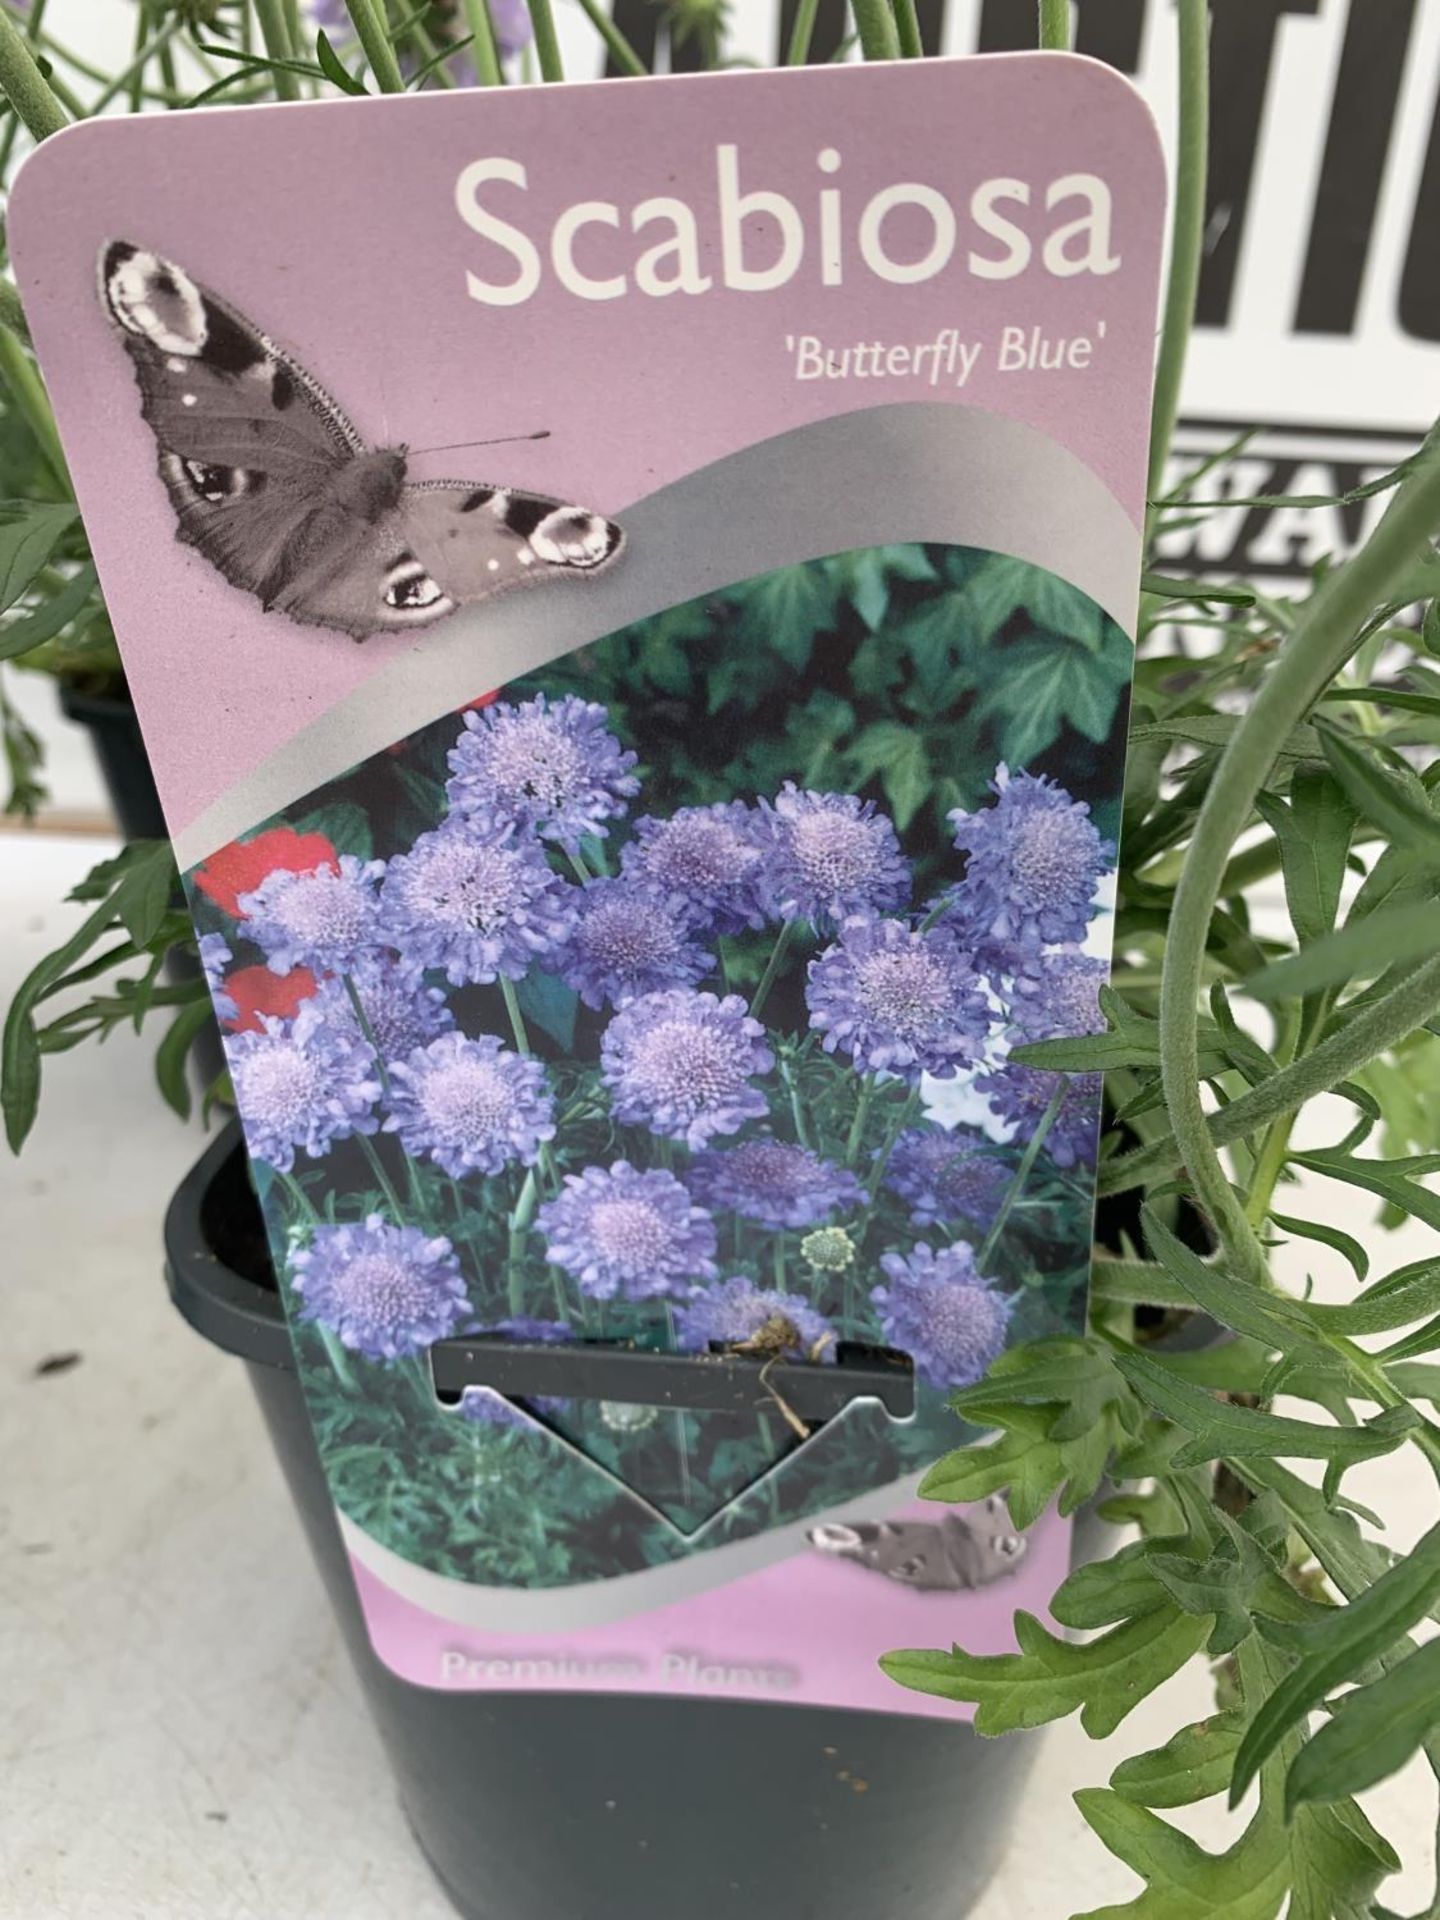 SIX SCABIOSA BUTTERFLY BLUE IN 2 LTR POTS 50-60CM TALL TO BE SOLD FOR THE SIX PLUS VAT - Image 7 of 8